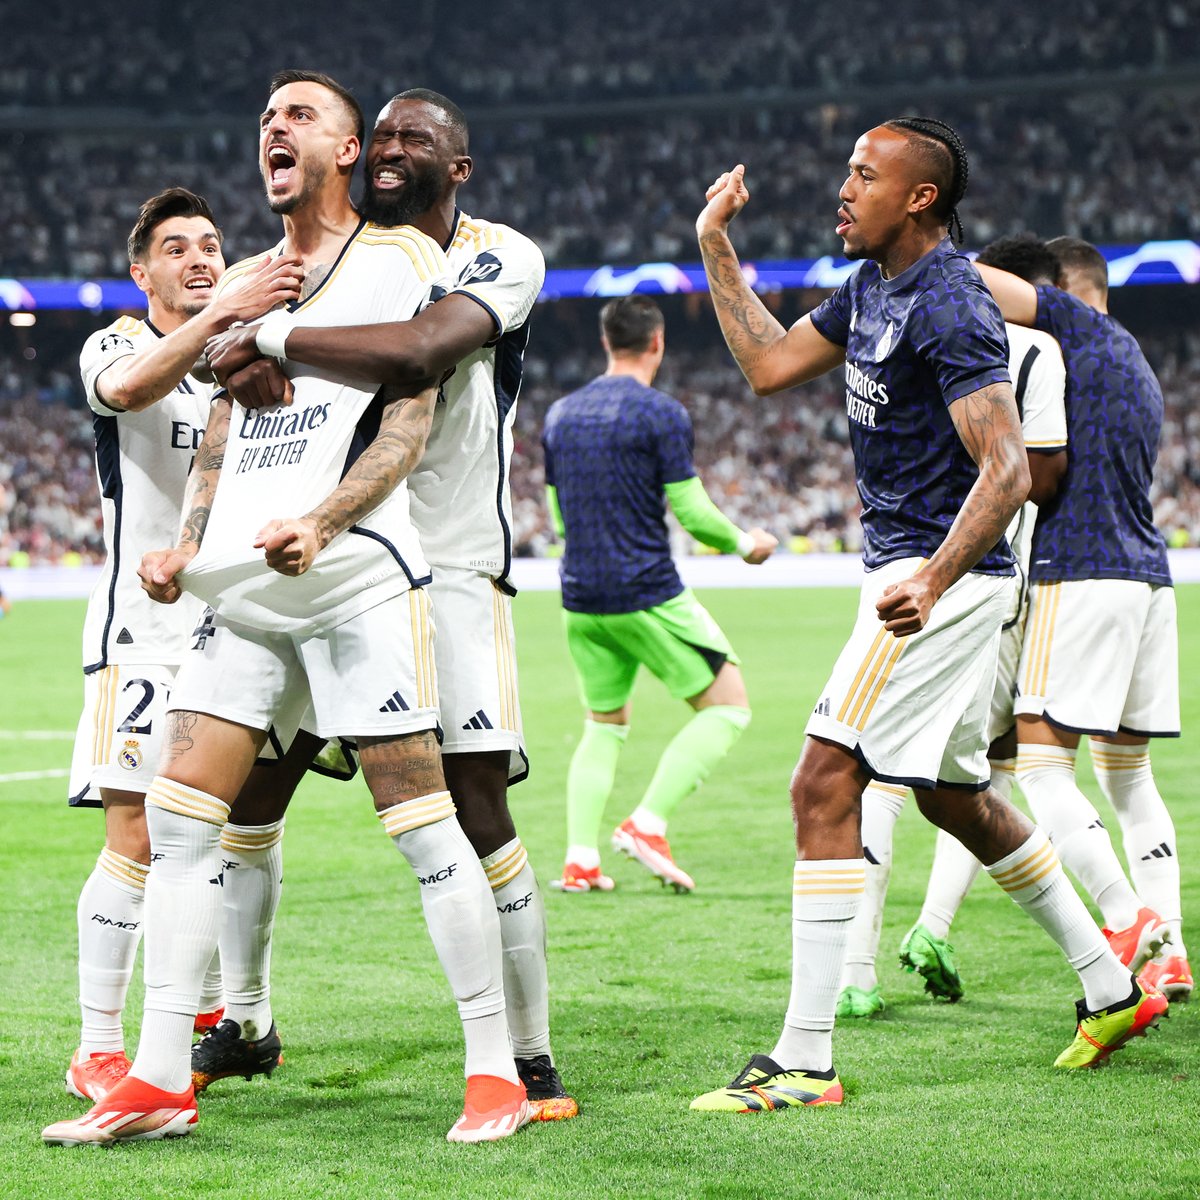 Semifinal vs. Man City (2022) ▪️ Down 5-4 until 90th minute ▪️ Rodrygo scores two in stoppage time to force ET ▪️ Madrid go on to win the tie Semifinal vs. Bayern (2024) ▪️ Down 3-2 until 88th minute ▪️ Joselu scores two to win the tie No one does it like Real Madrid 🤯